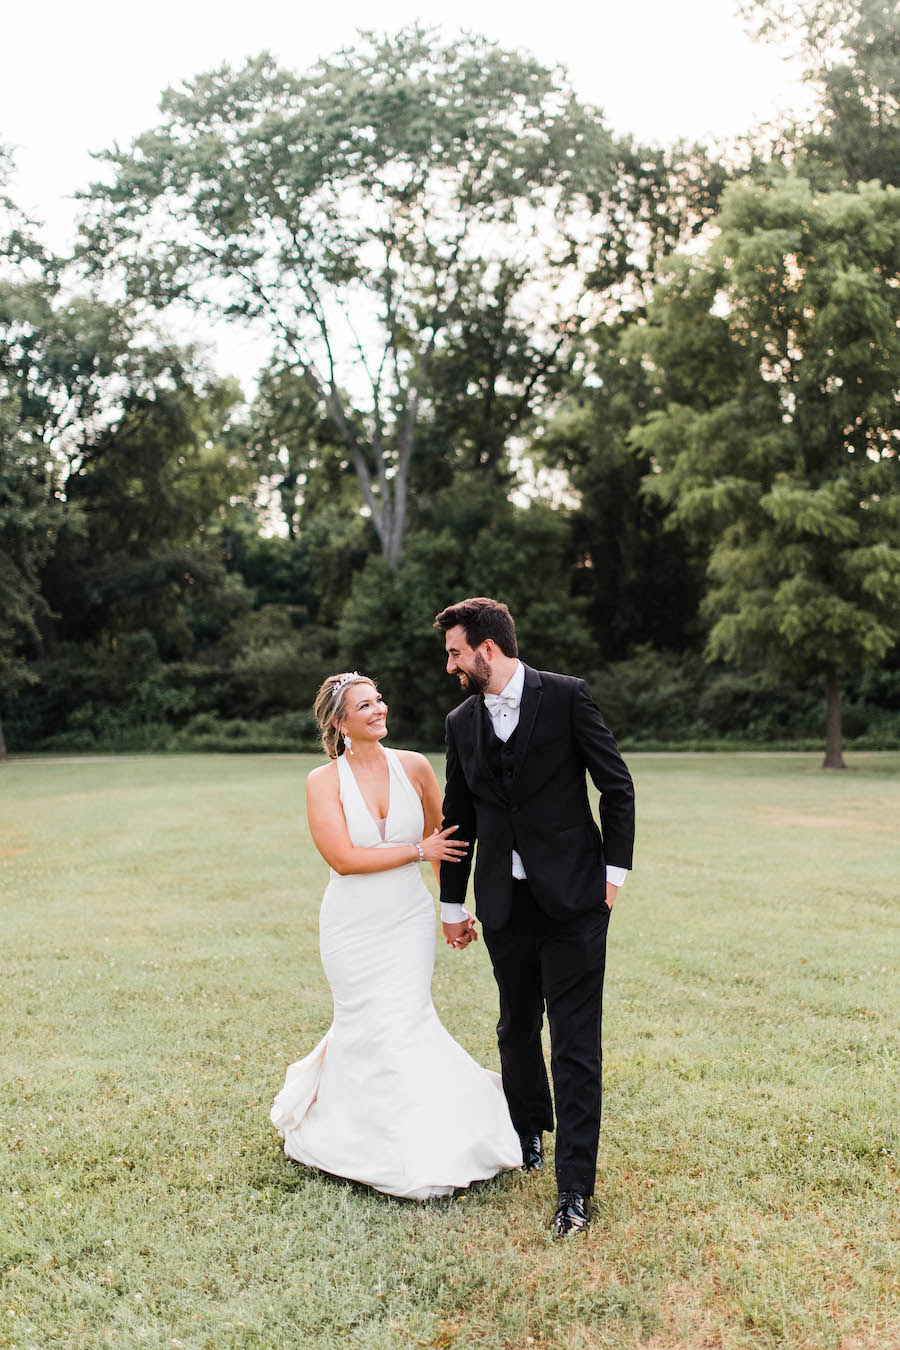 Get inspired by this neutral wedding color palette from Nashville garden wedding venue CJ's Off the Square. 